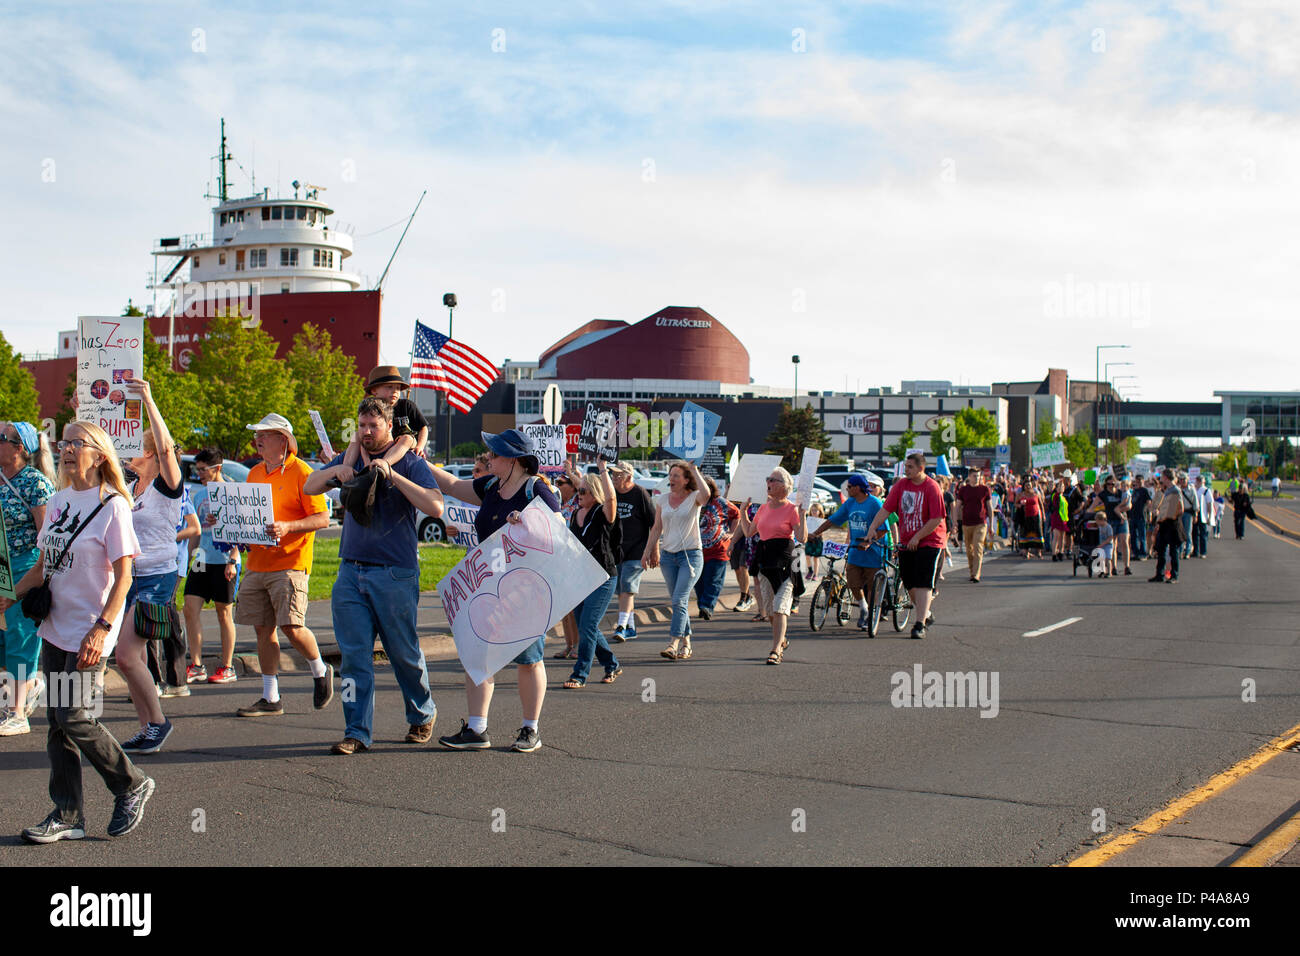 DULUTH, MINNESOTA, USA - June 20, 2018: A large crowd of protesters march in front of Amsoil arena while President Donald Trump speaks at a rally Wednesday night. Credit: Theresa Scarbrough/Alamy Live News Stock Photo